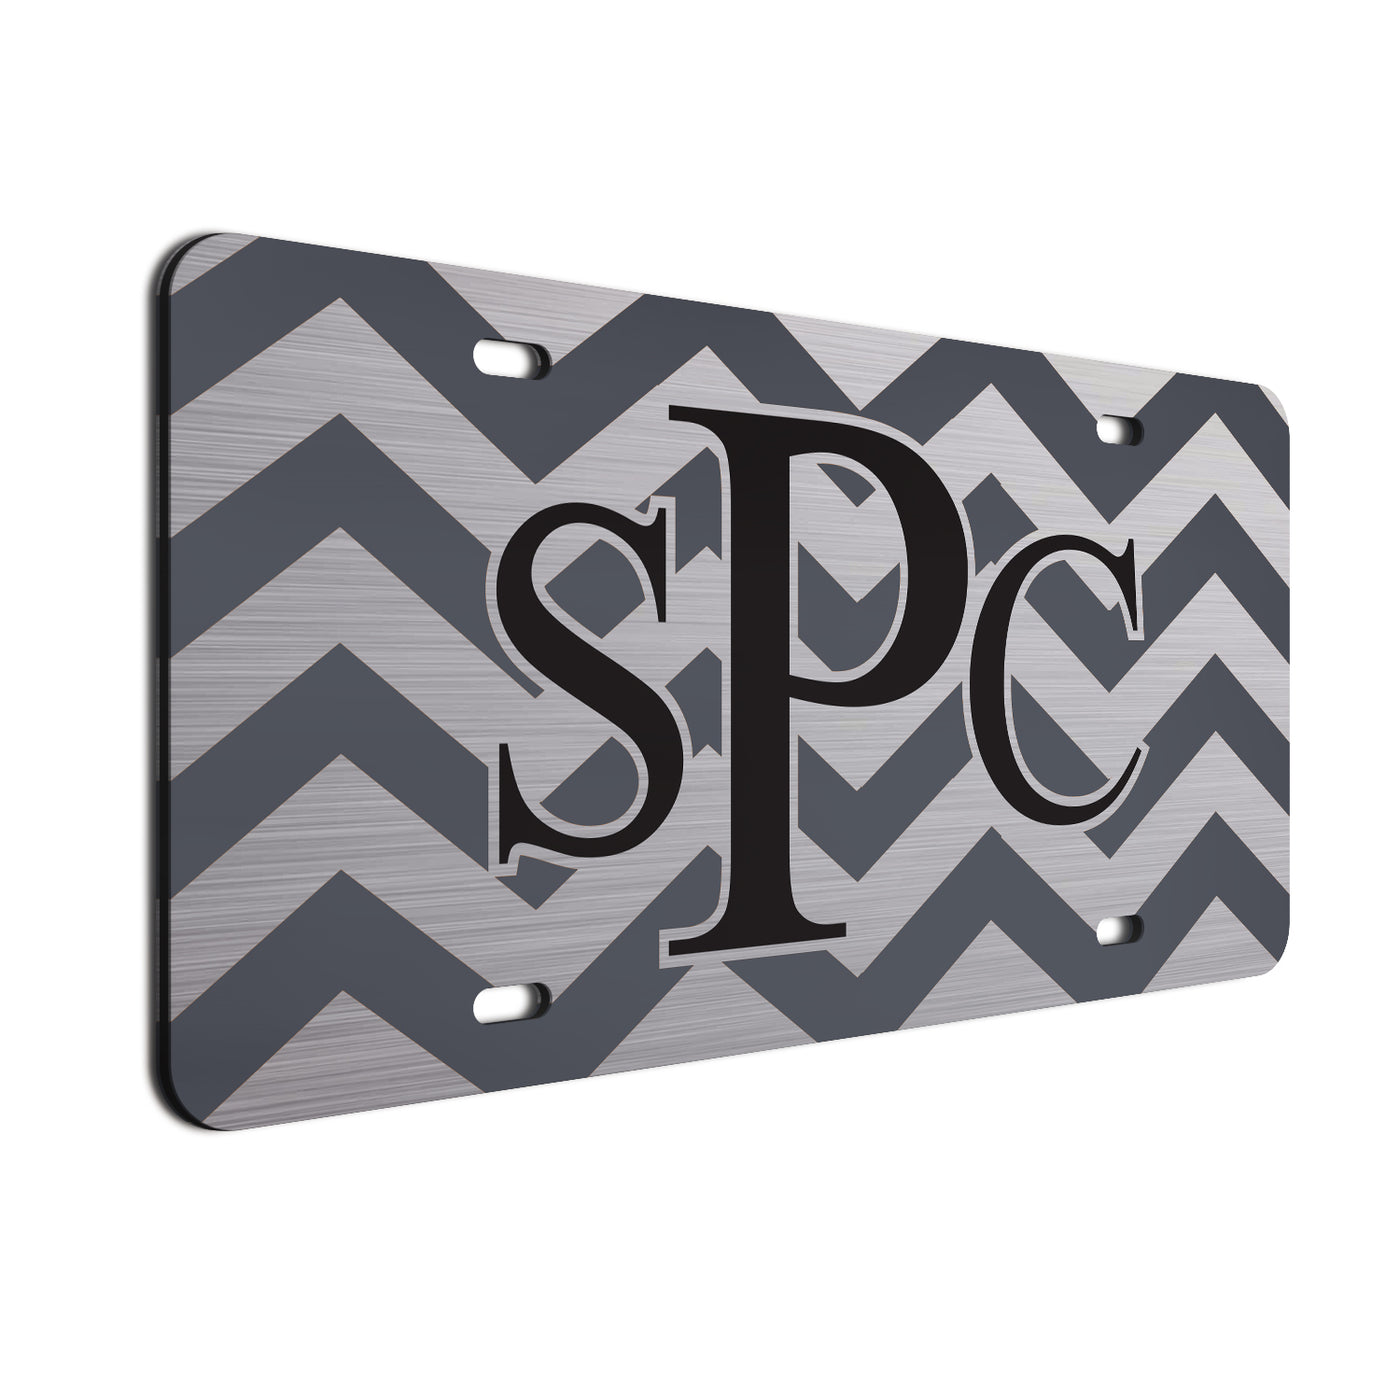 Chevron Bold Text License Plate  Charcoal